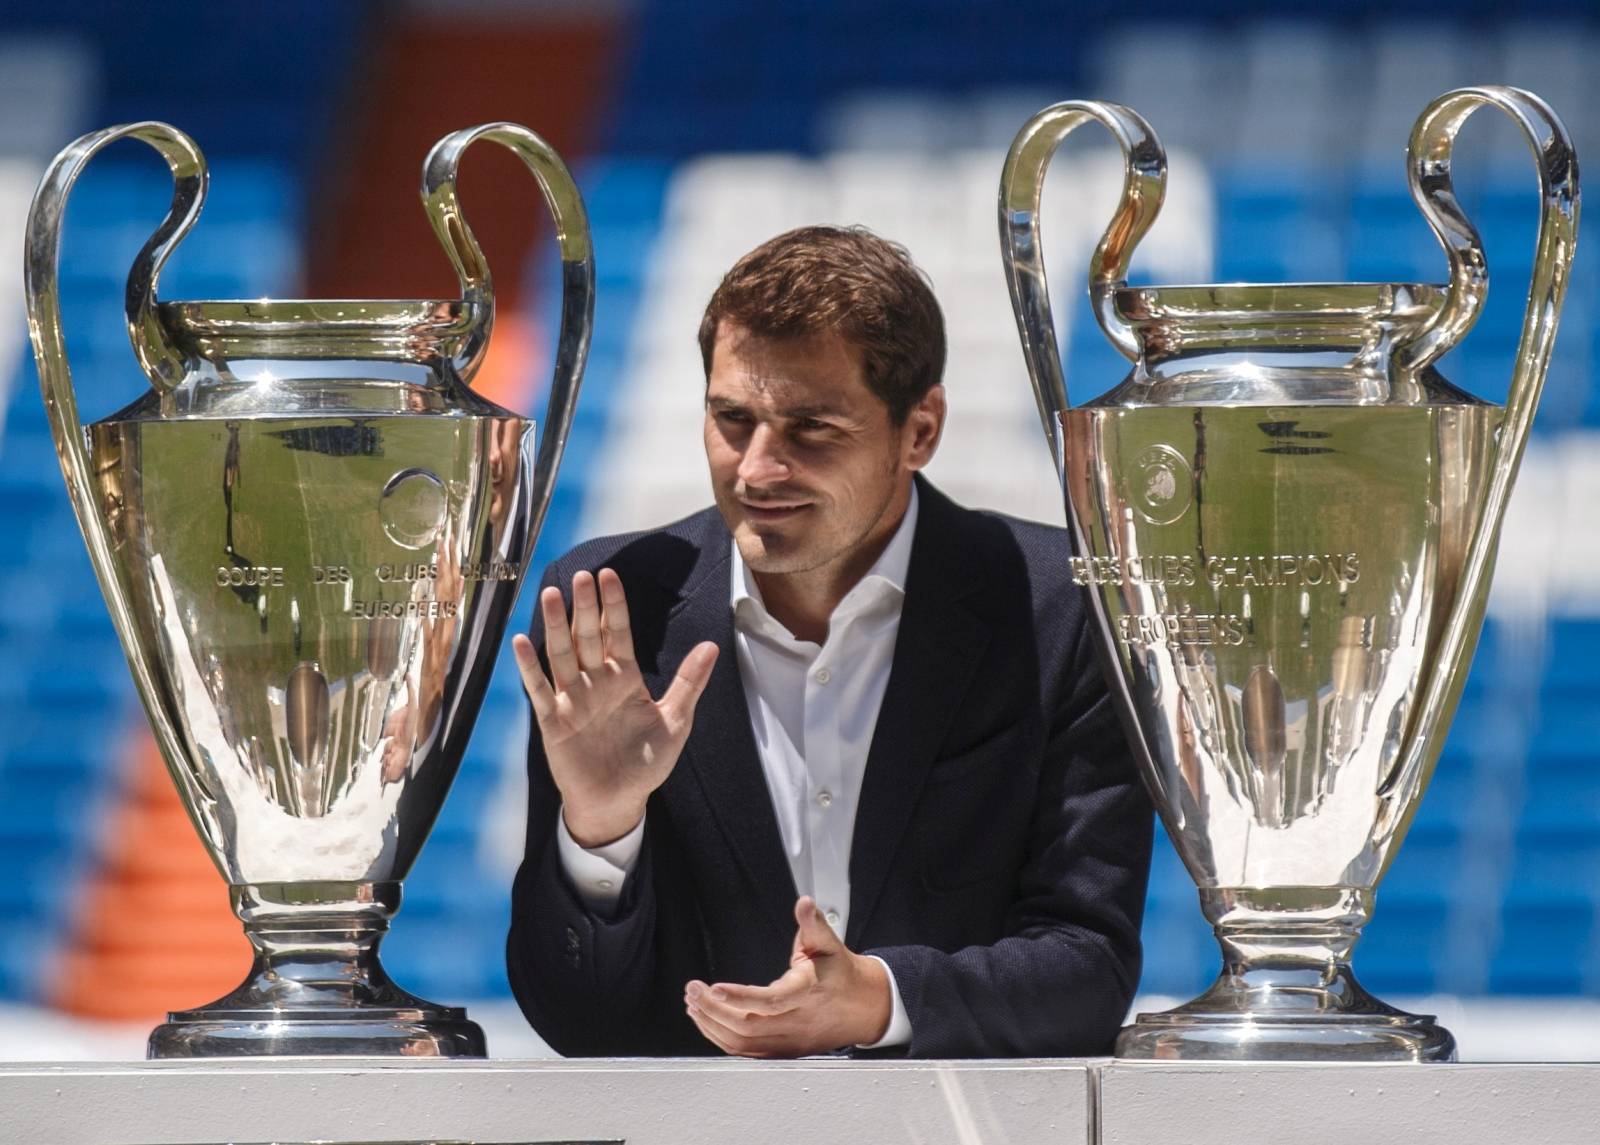 FILE PHOTO: Departing Real Madrid captain and goalkeeper Iker Casillas waves as he poses surrounded by trophies at an official send-off at the Bernabeu stadium in Madrid, Spain